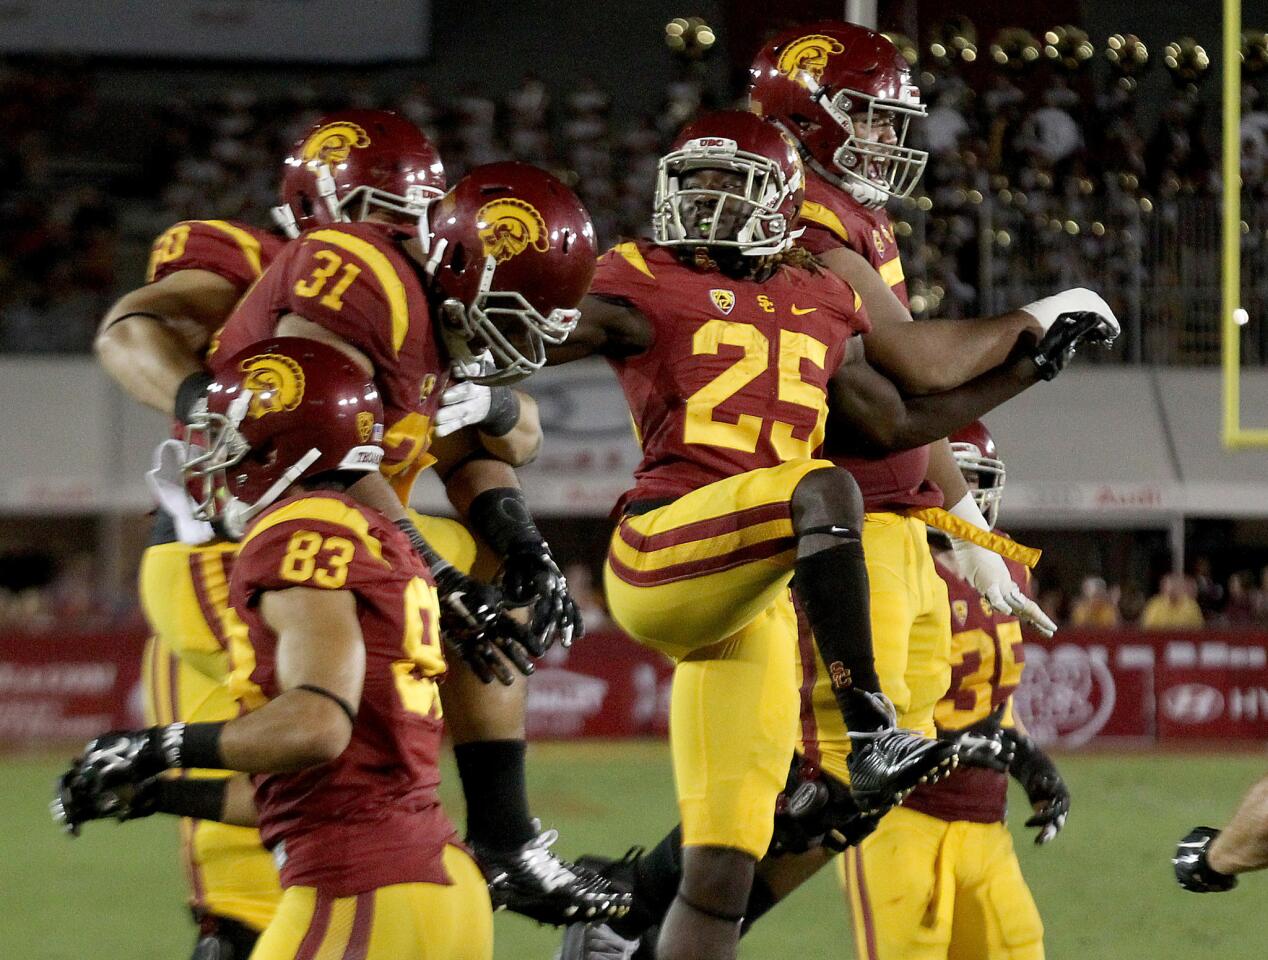 USC tailback Ronad Jones (25) celebrates with teammates after scoring a touchdown against Idaho in the fourth quarter on Saturday at the Coliseum.